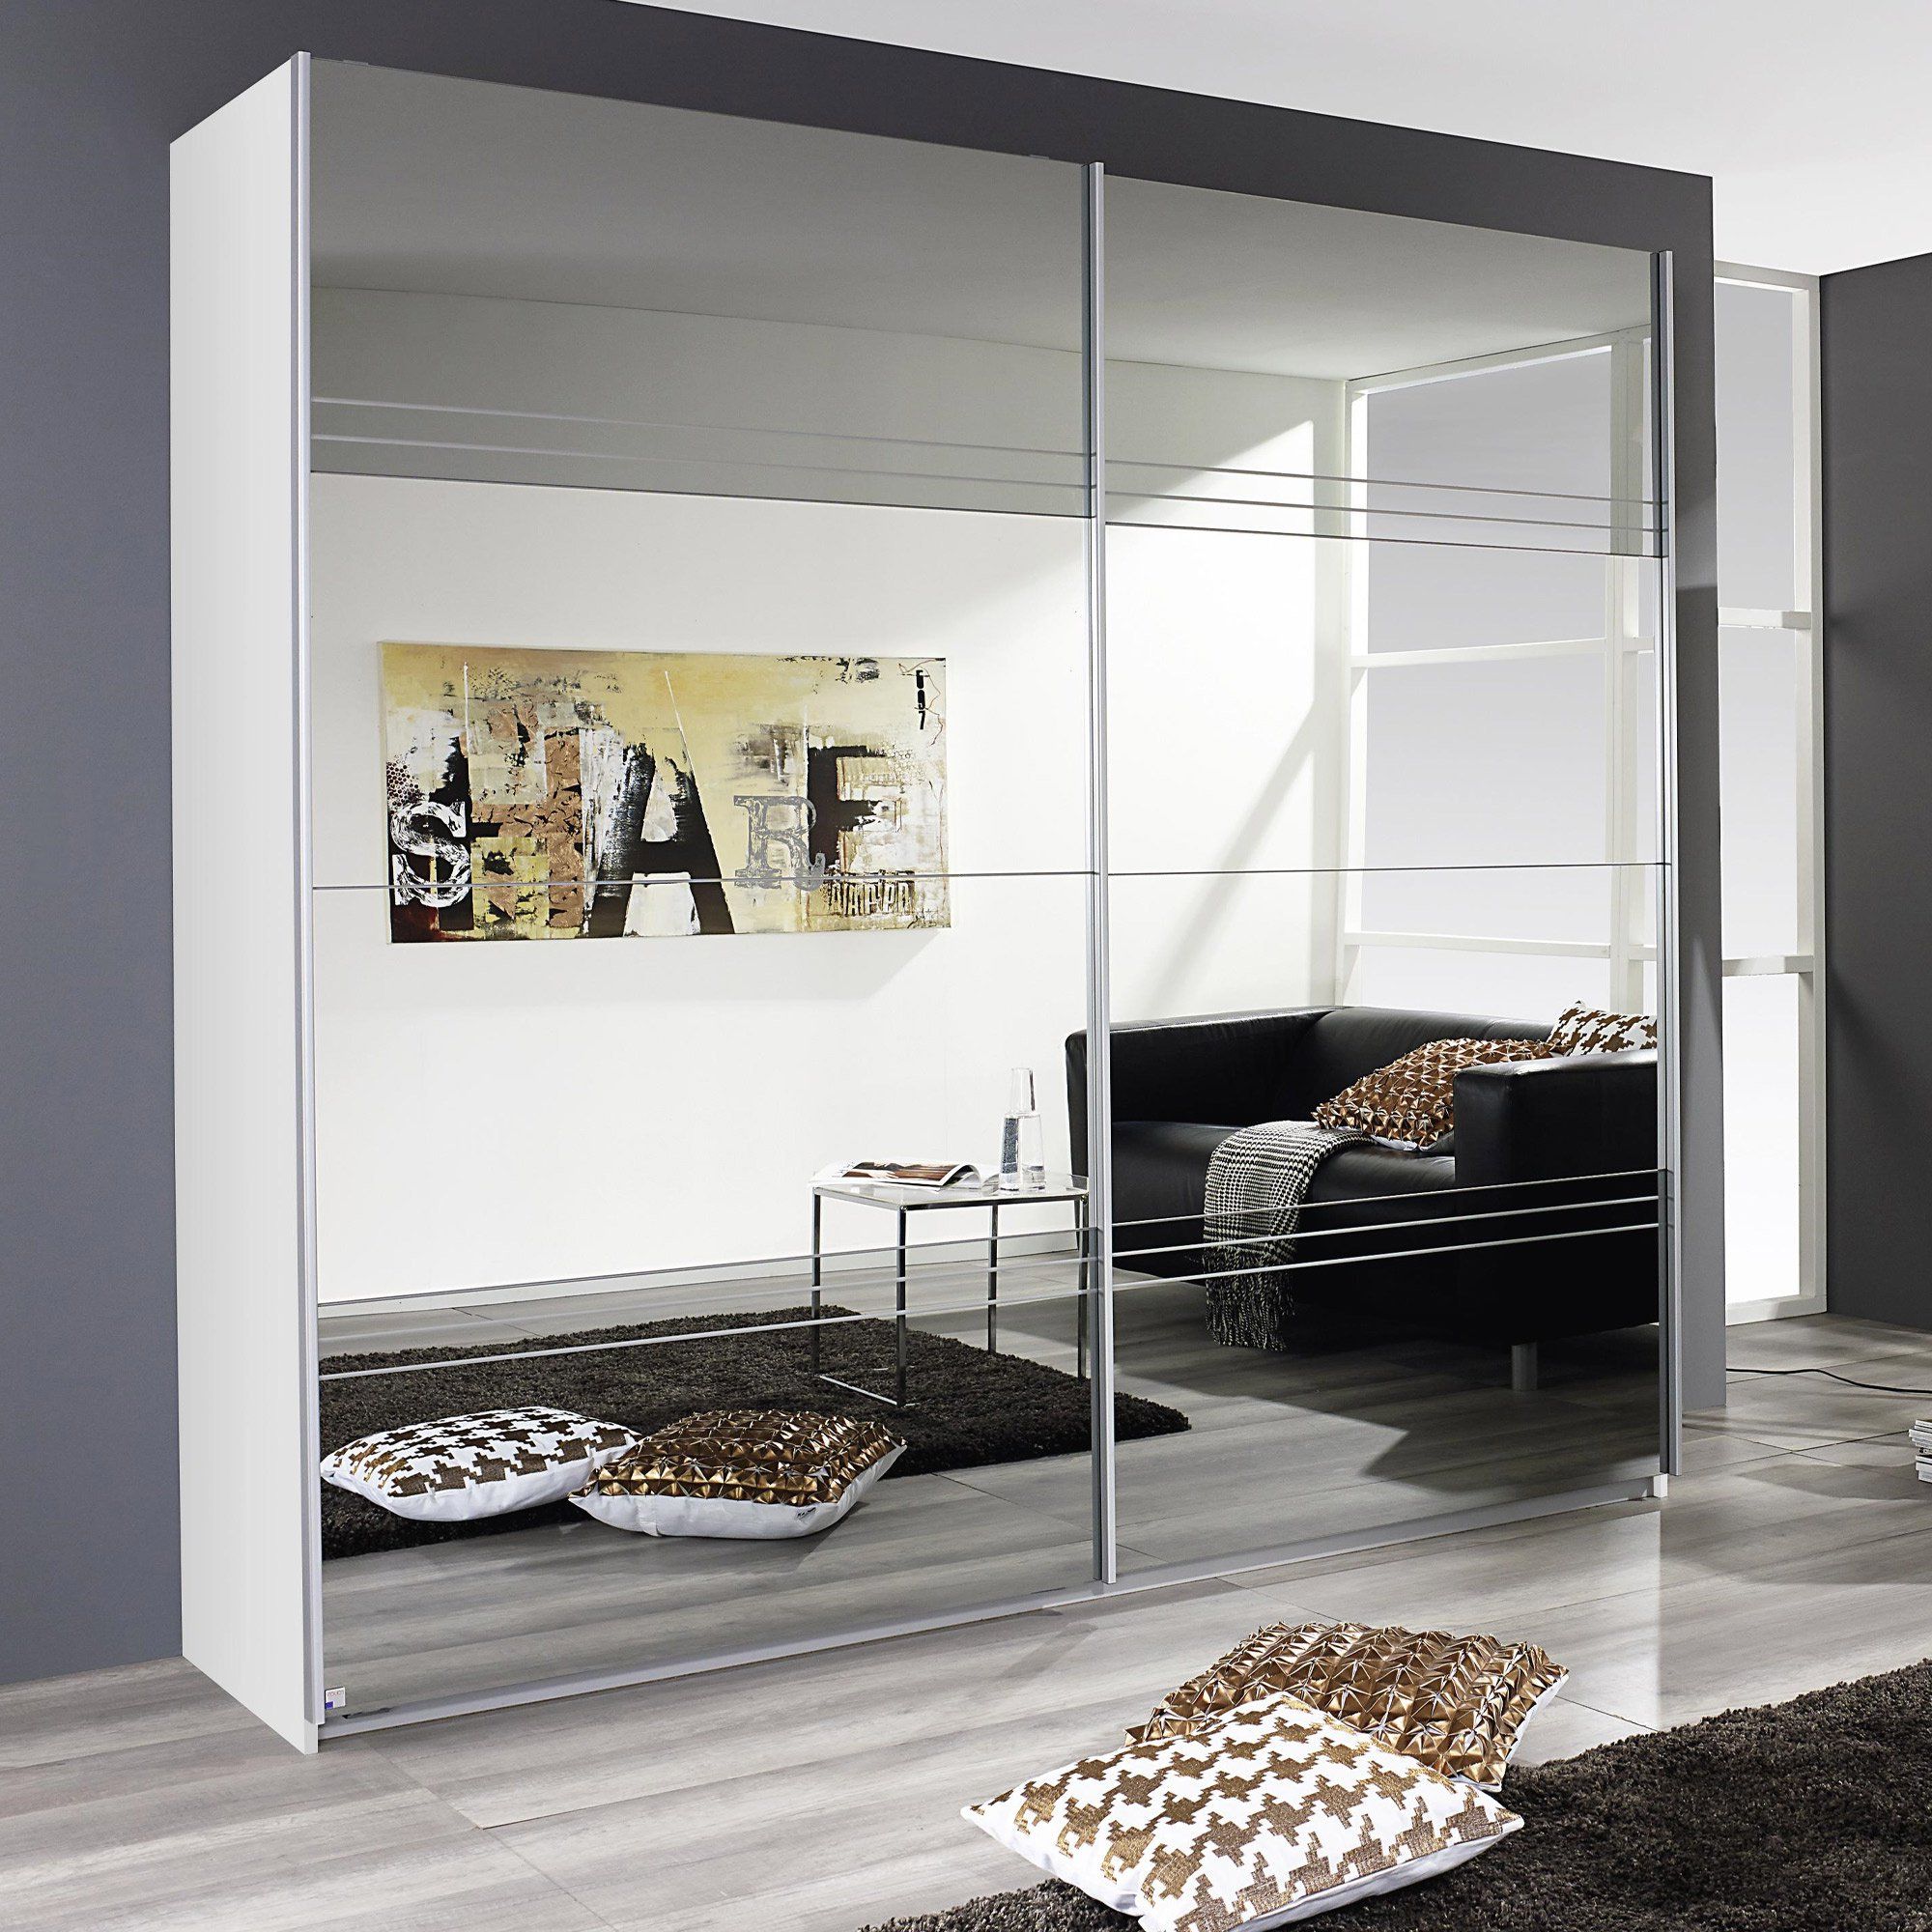 White Cleo Mirrored Door Gliding Door Wardrobe Throughout Cheap Wardrobes With Mirrors (Gallery 2 of 20)